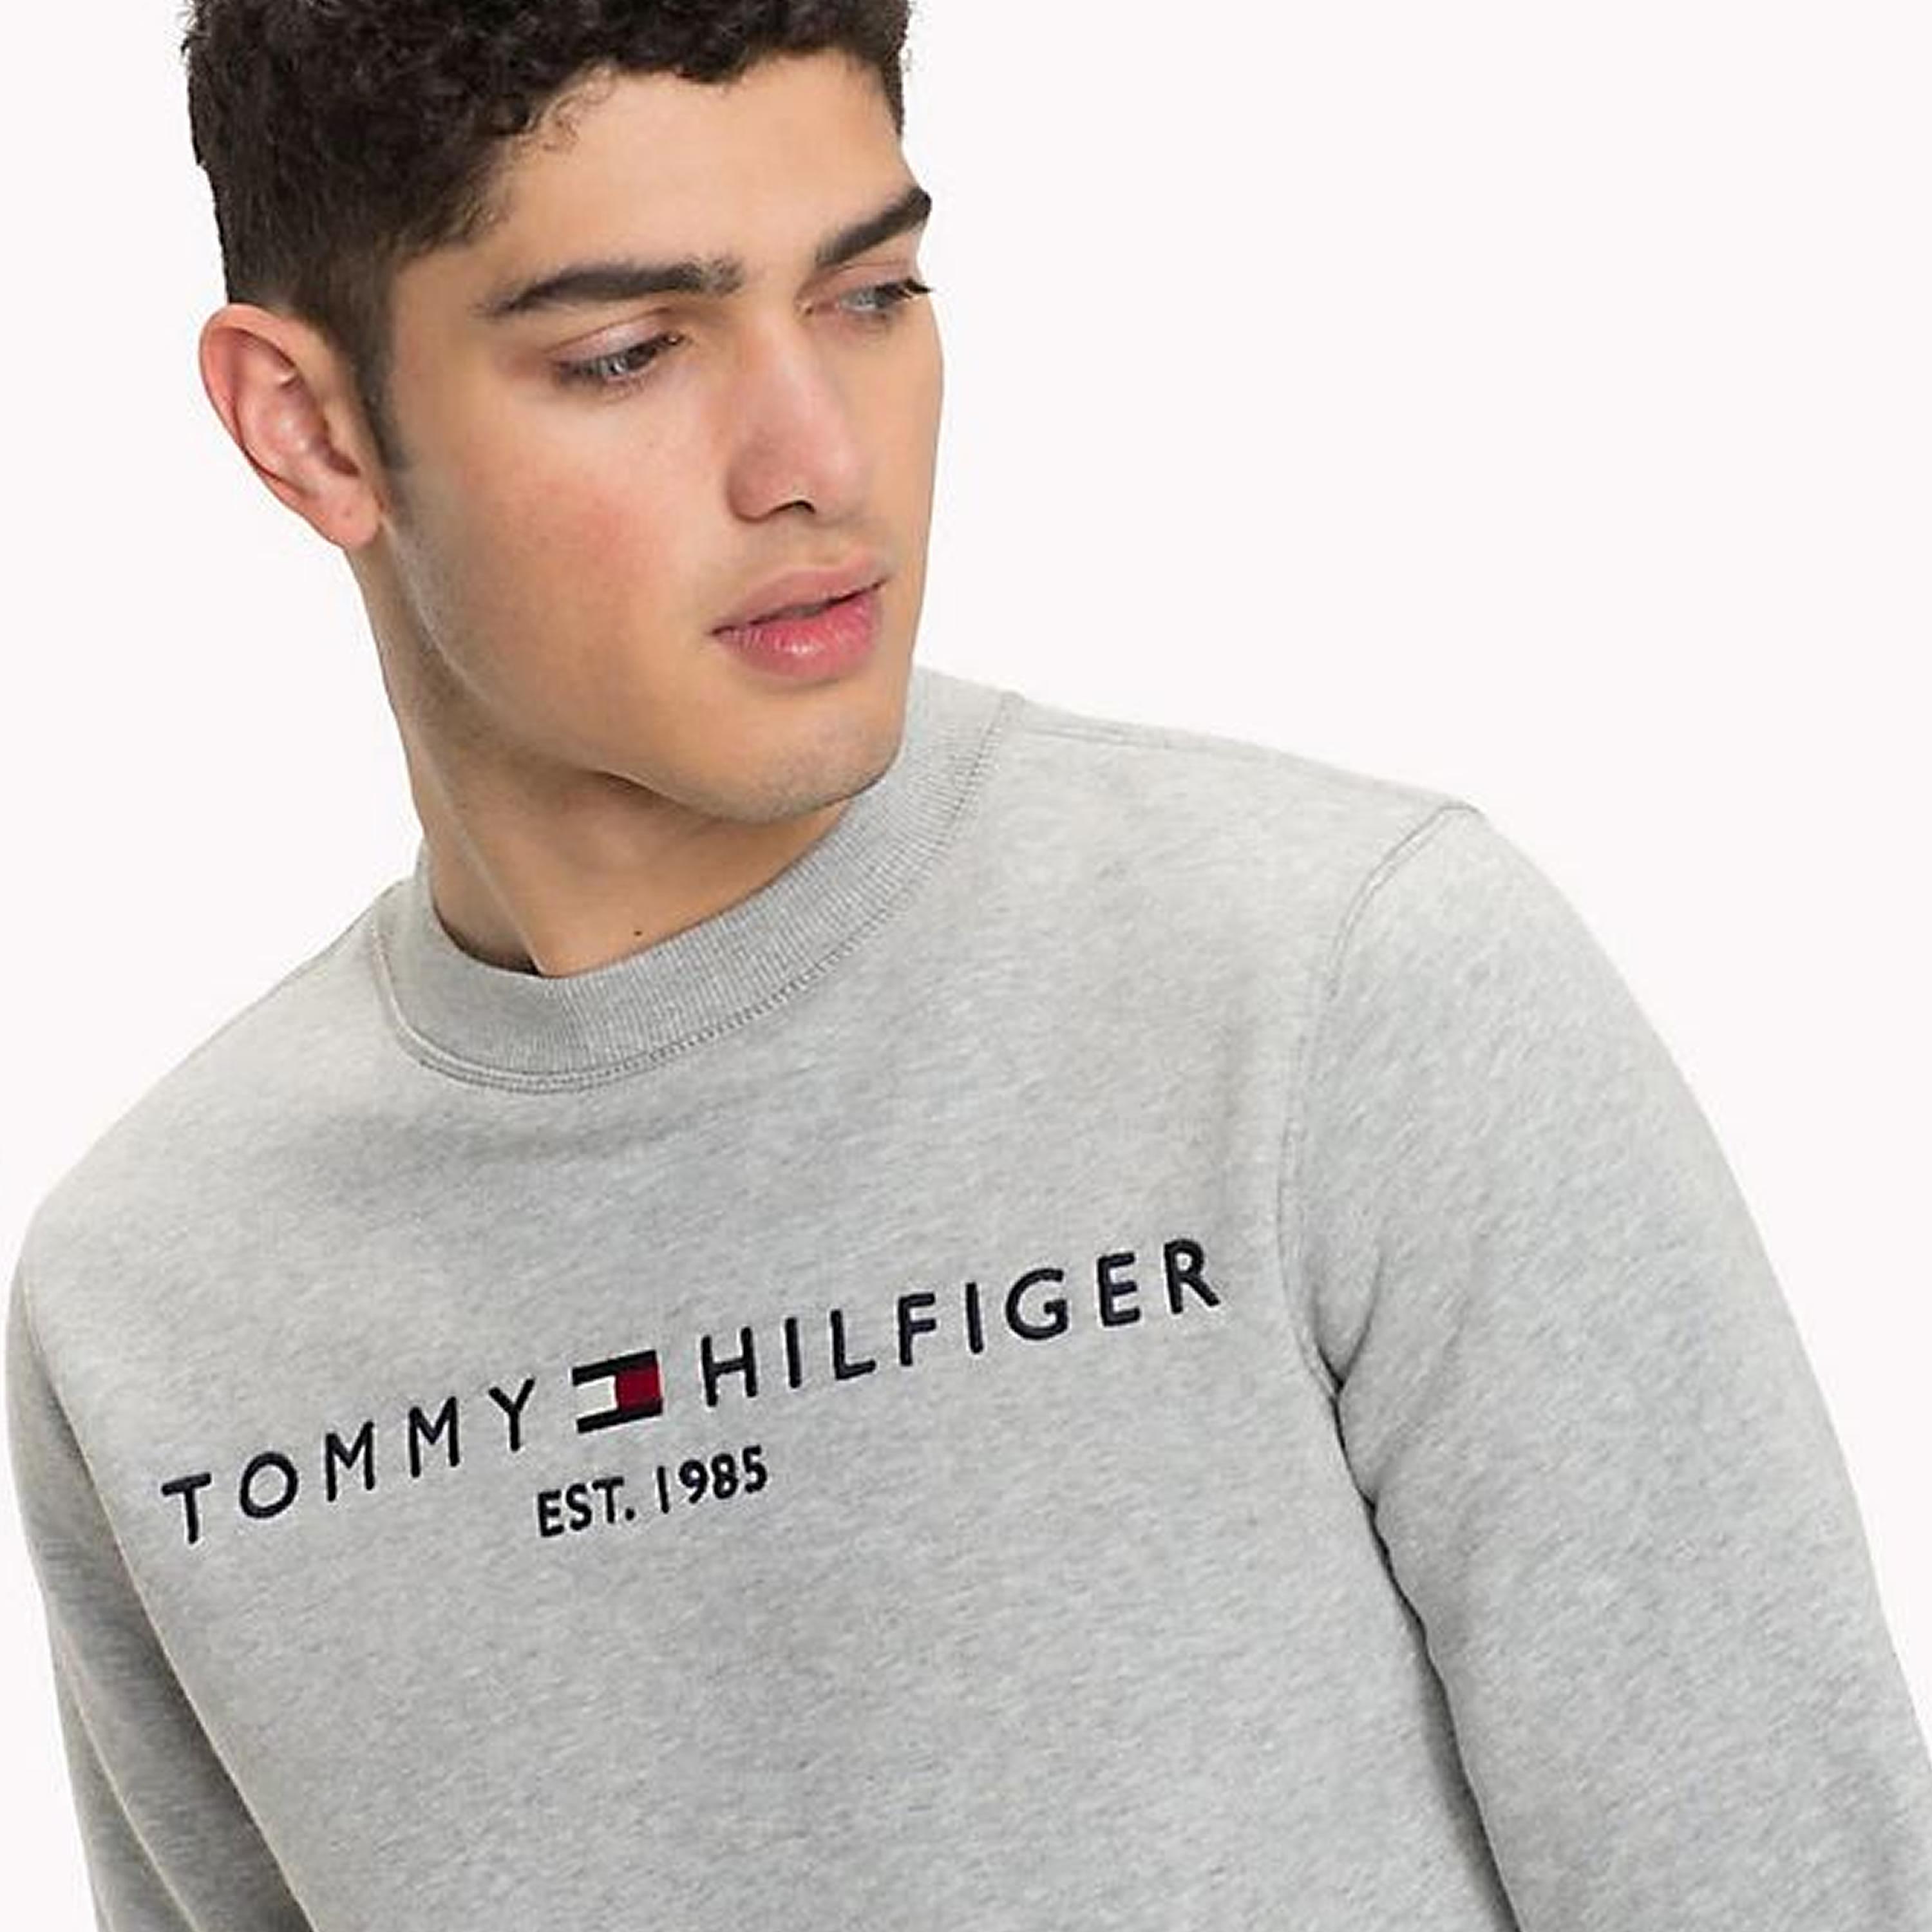 Tommy Hilfiger Logo Sweater in Gray for Men - Lyst